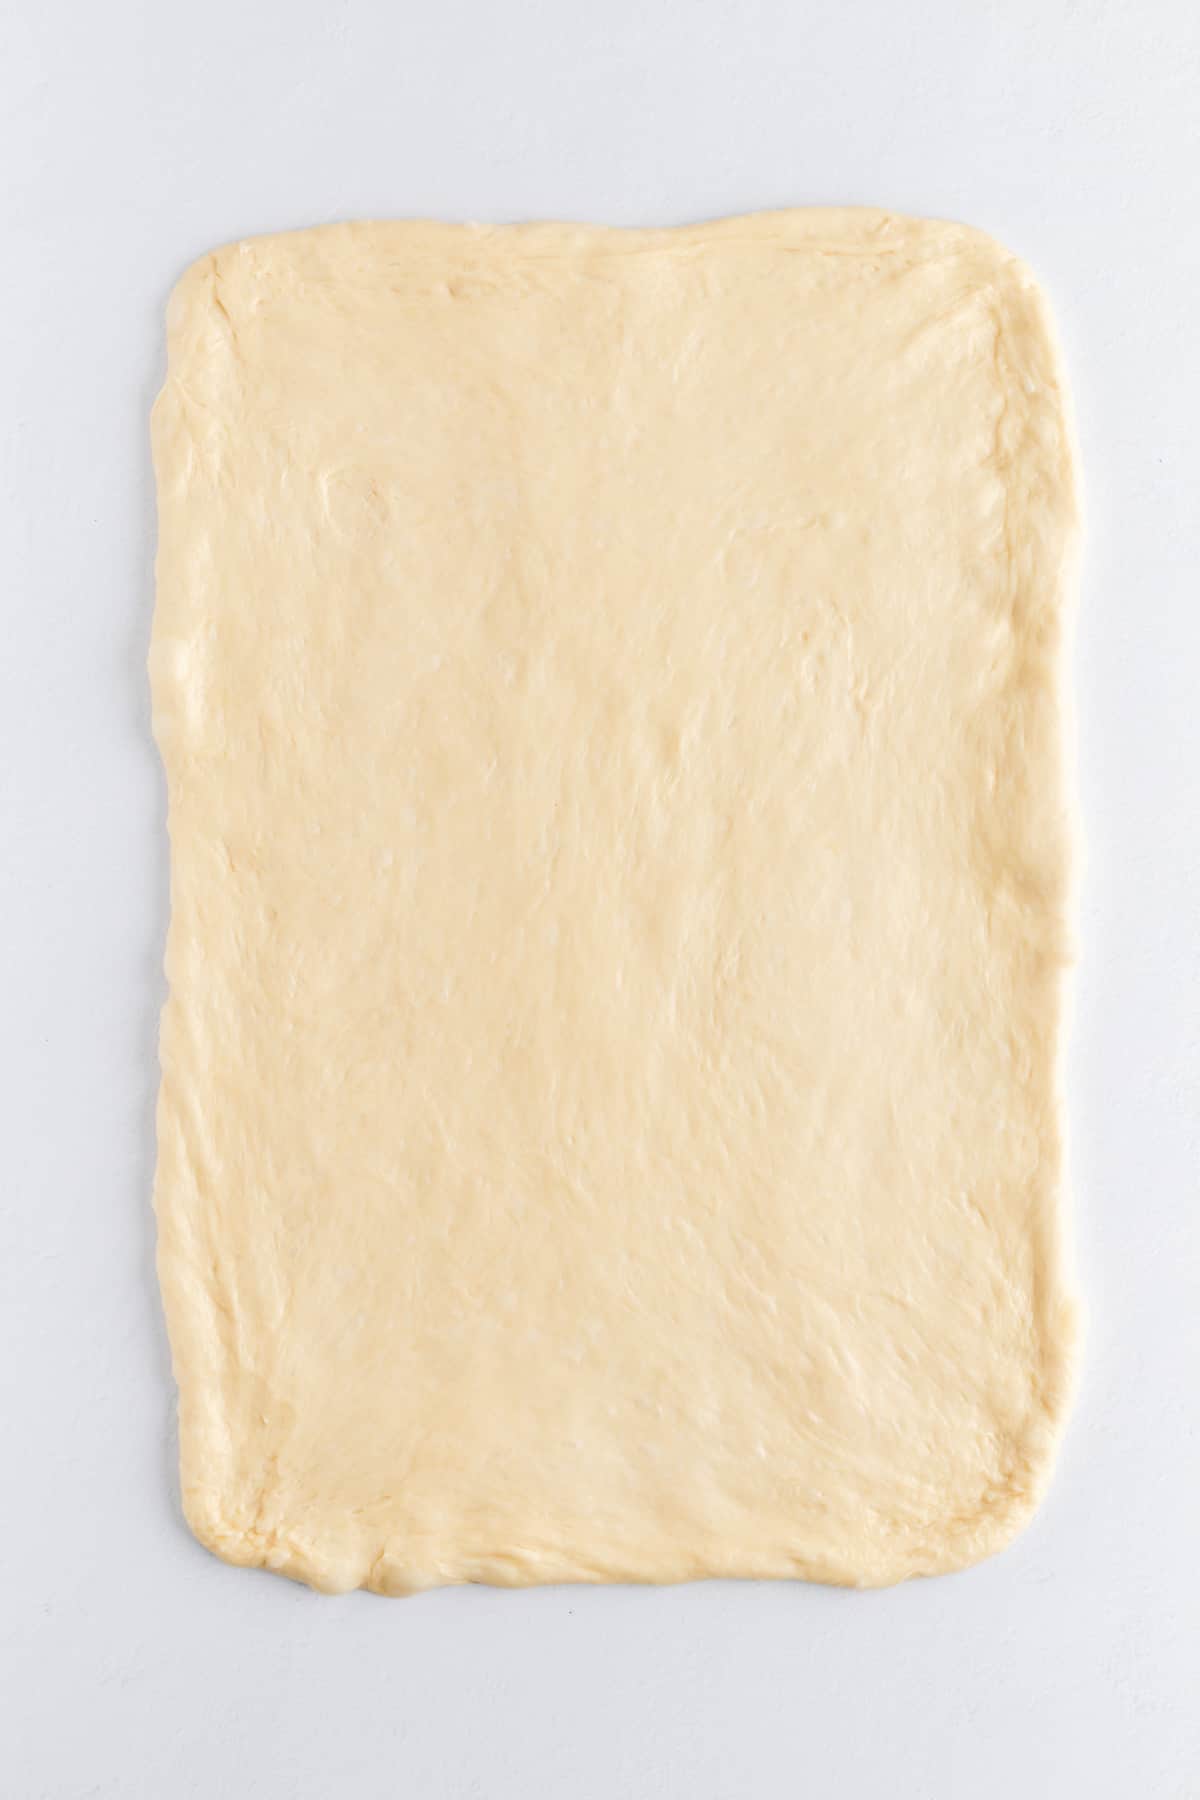 rolled out brioche dough in a 12" x 18" rectangle on a white background.